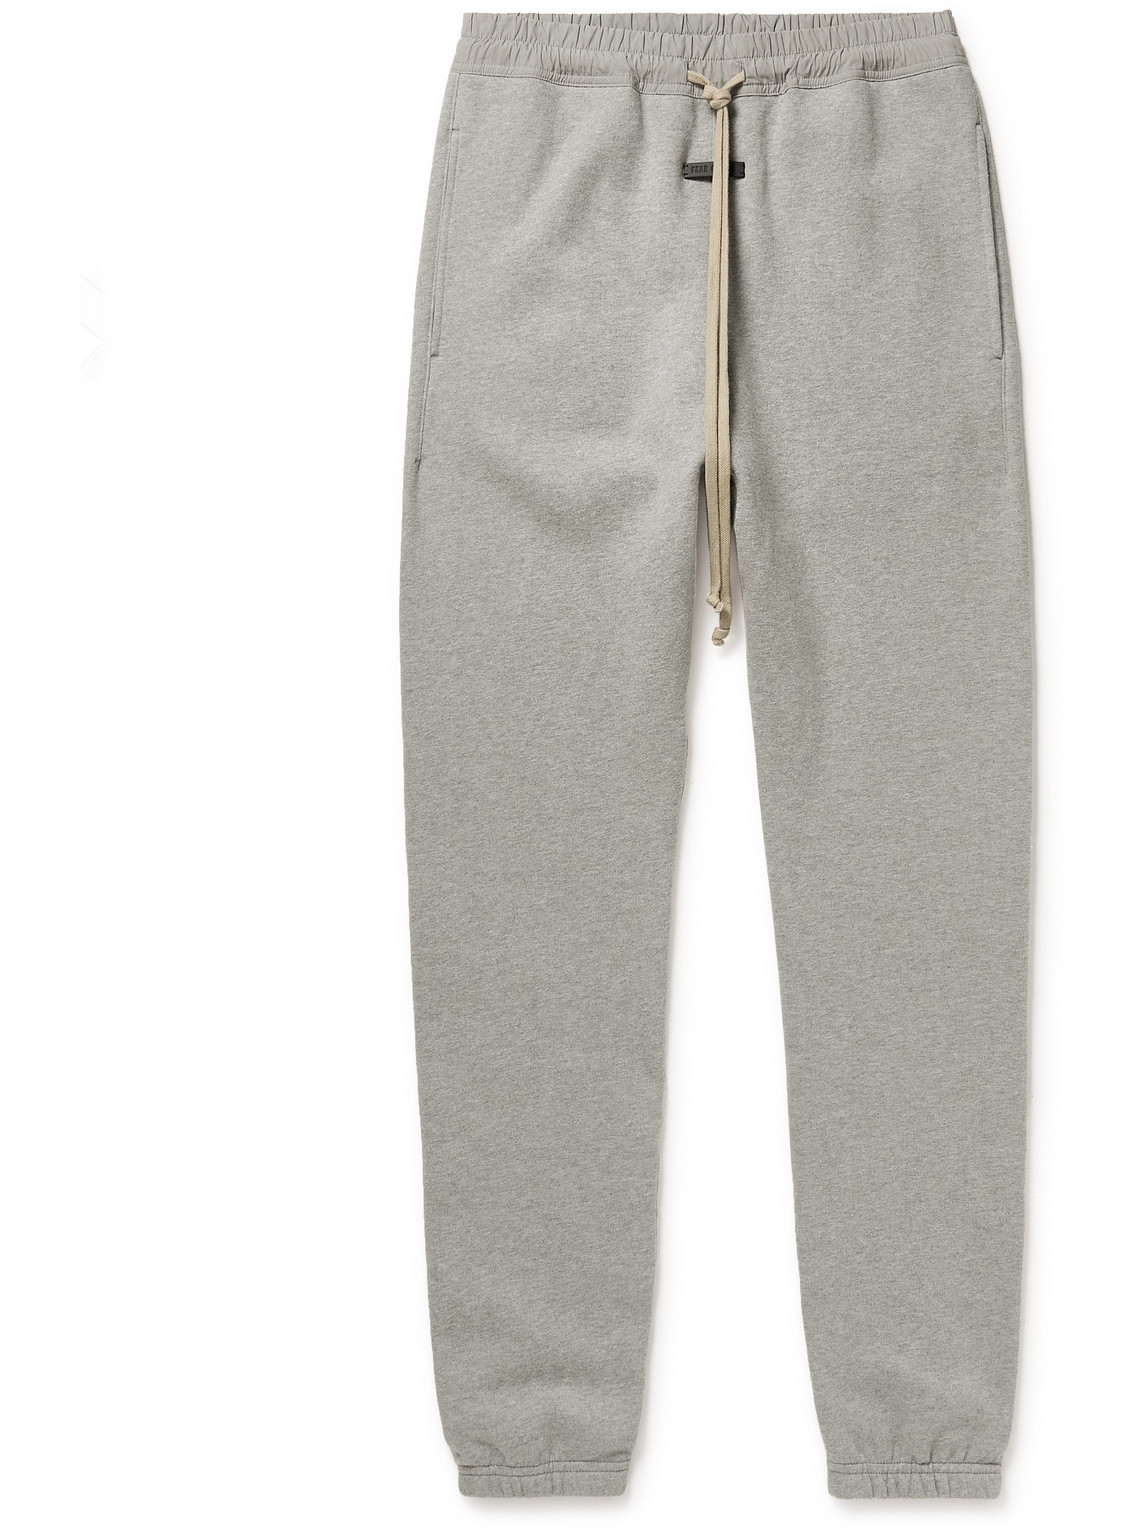 The Vintage Tapered Cotton-Jersey Sweatpants